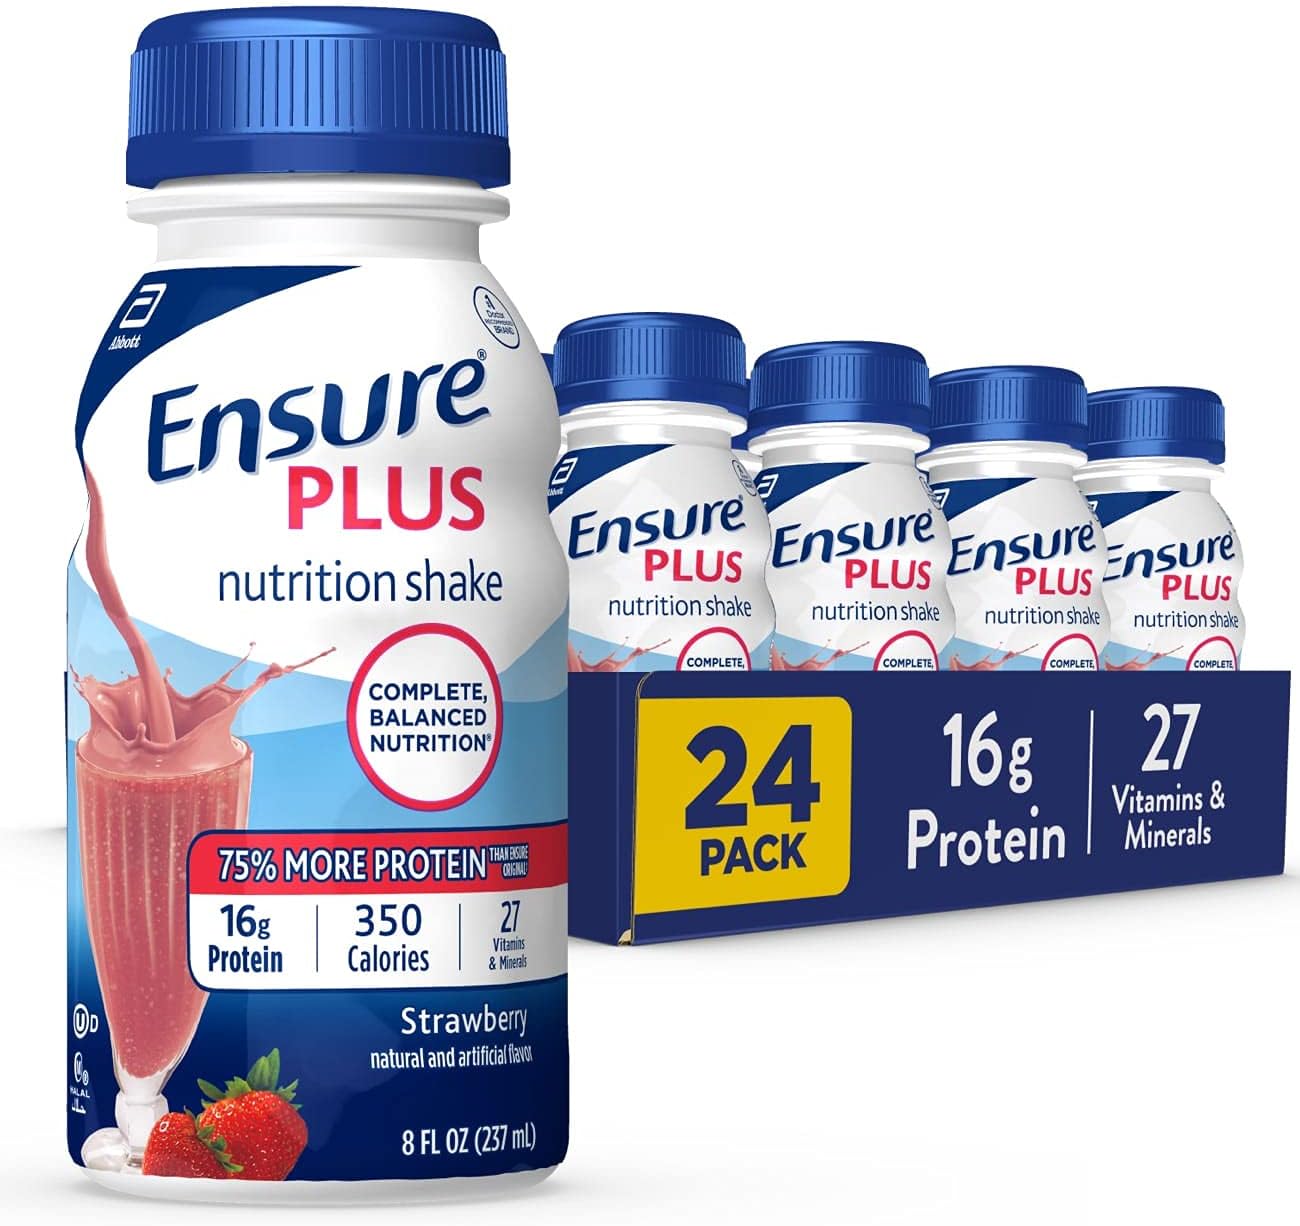 Ensure Plus Nutrition Shake with 16 Grams of Protein, Meal Replacement